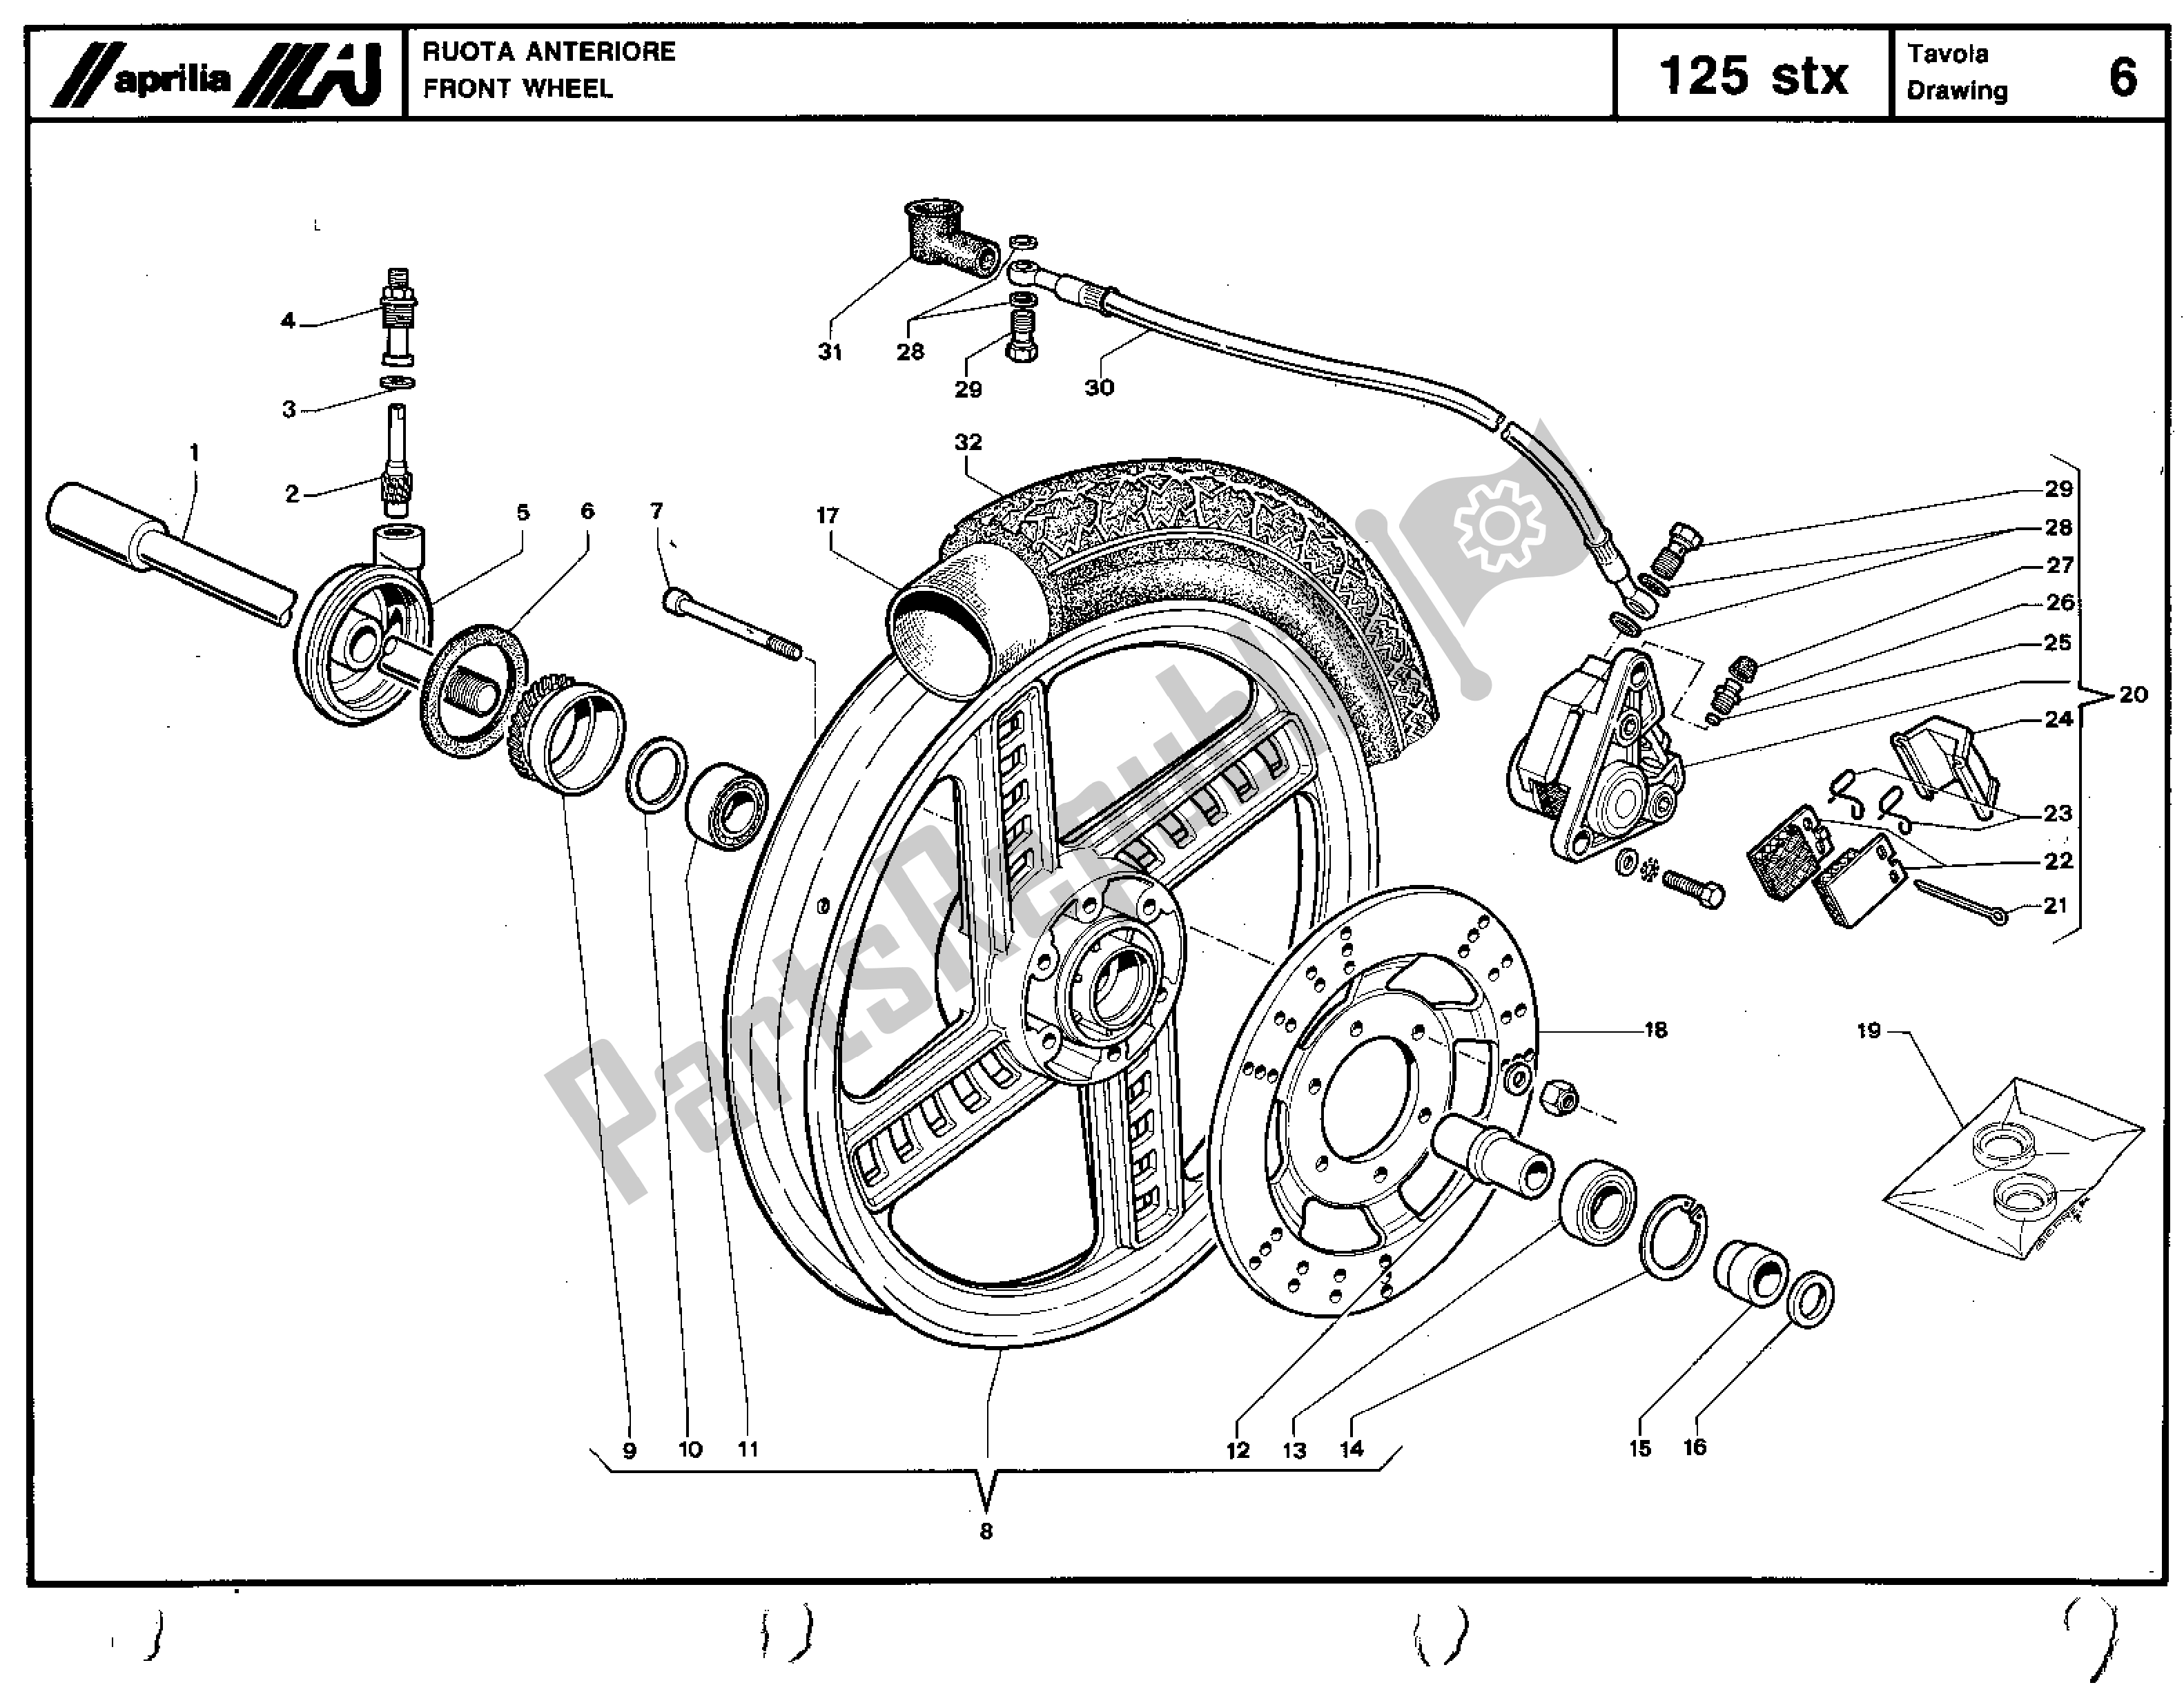 All parts for the Front Wheel of the Aprilia STX 125 1984 - 1986